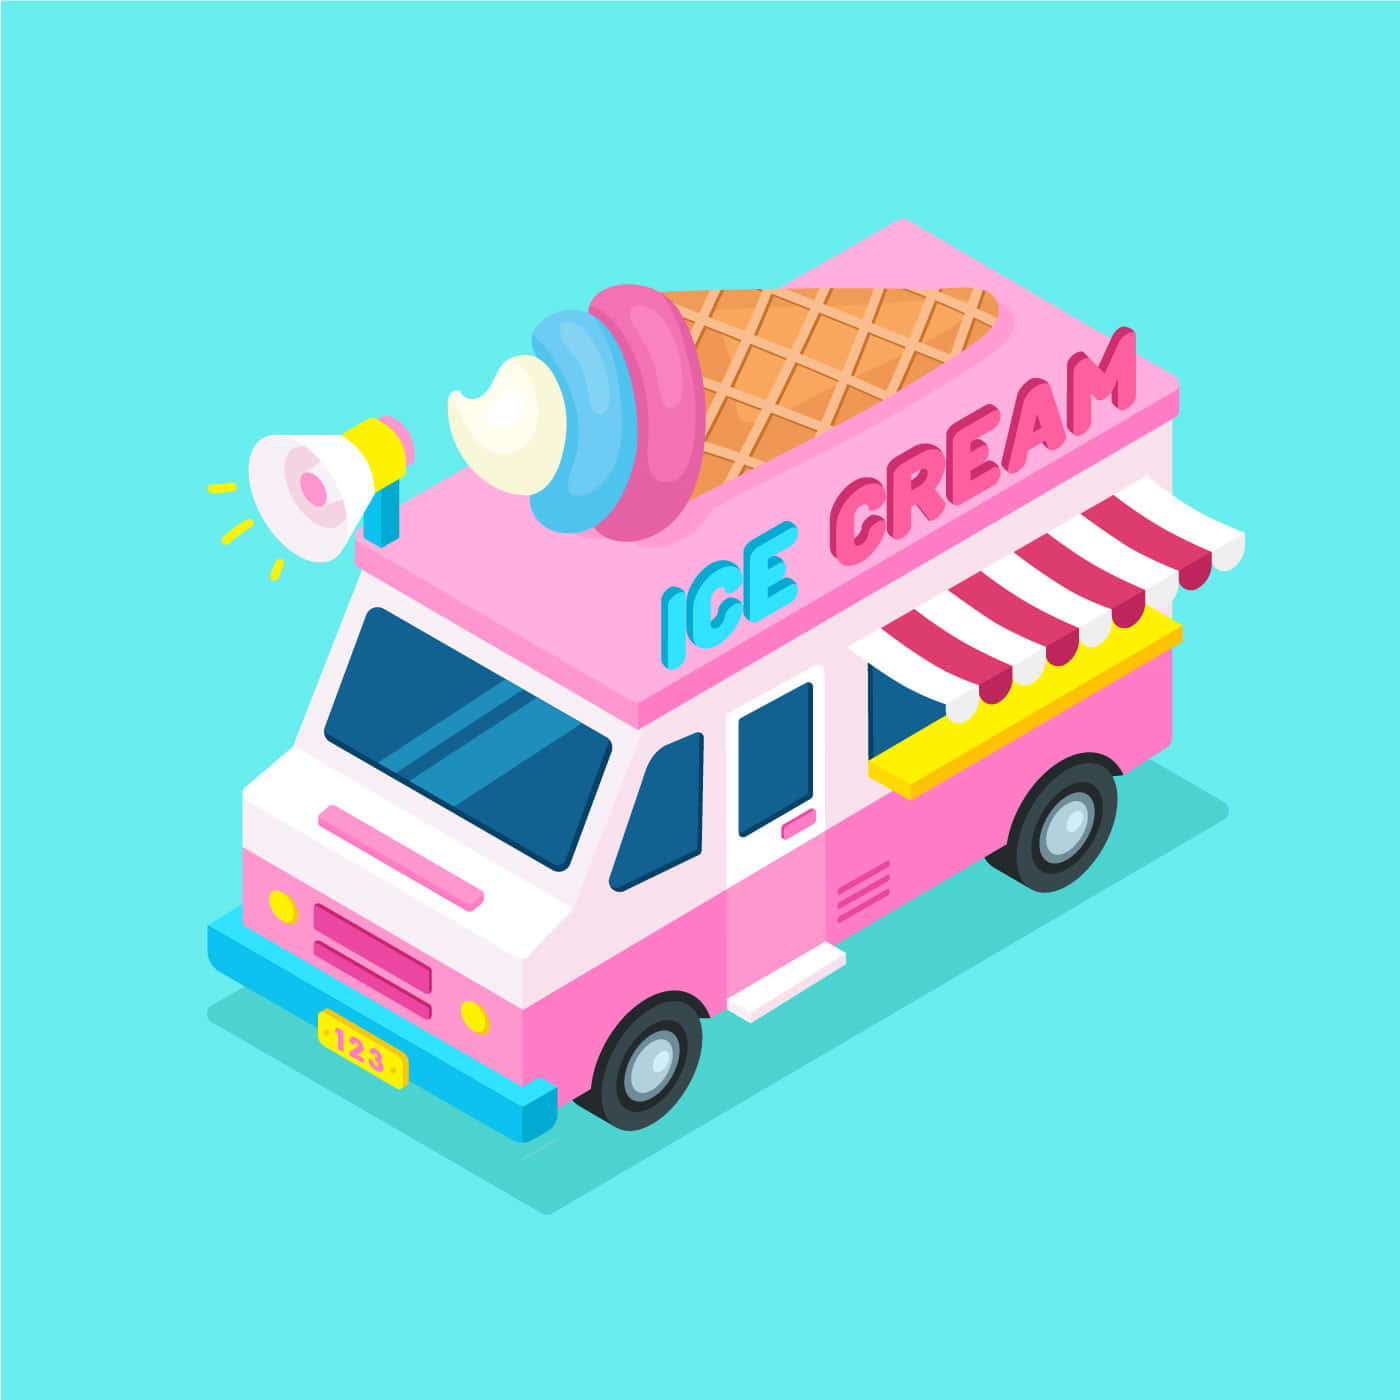 Get ready for some sweet treats with this classic ice cream truck.